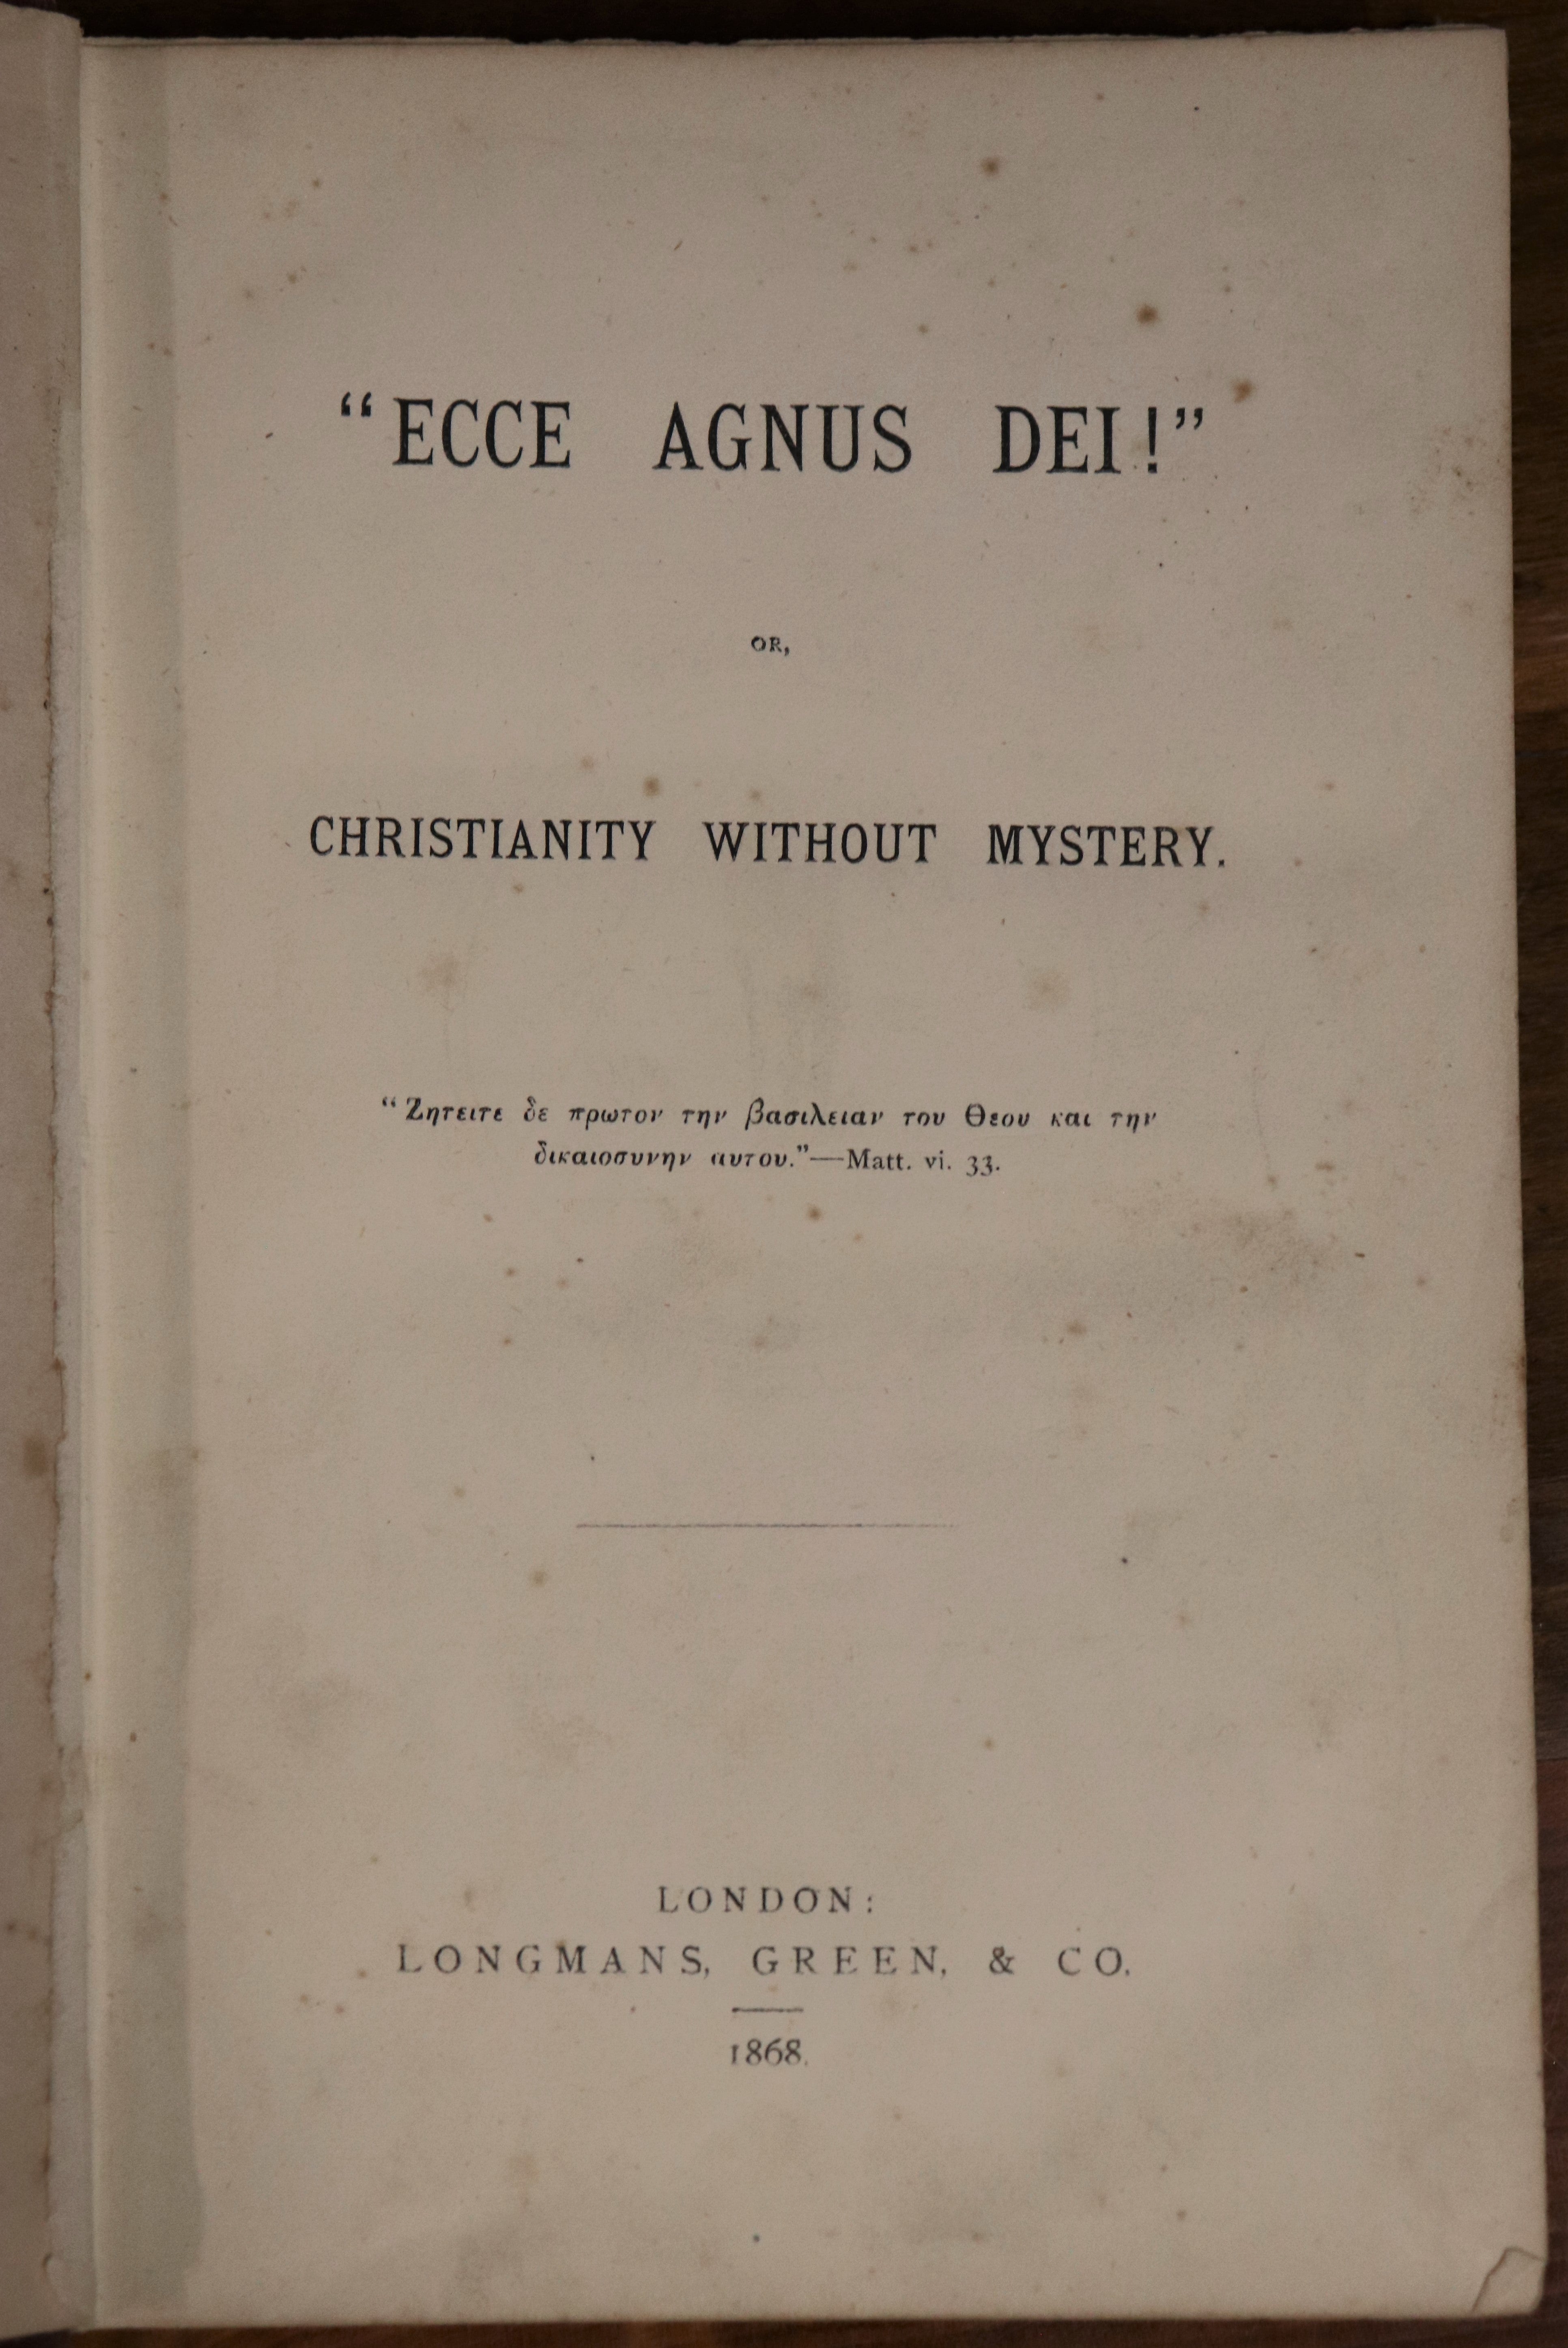 Ecce Agnus Dei: Christianity Without Mystery - 1868 - Antique Religious Book - 0